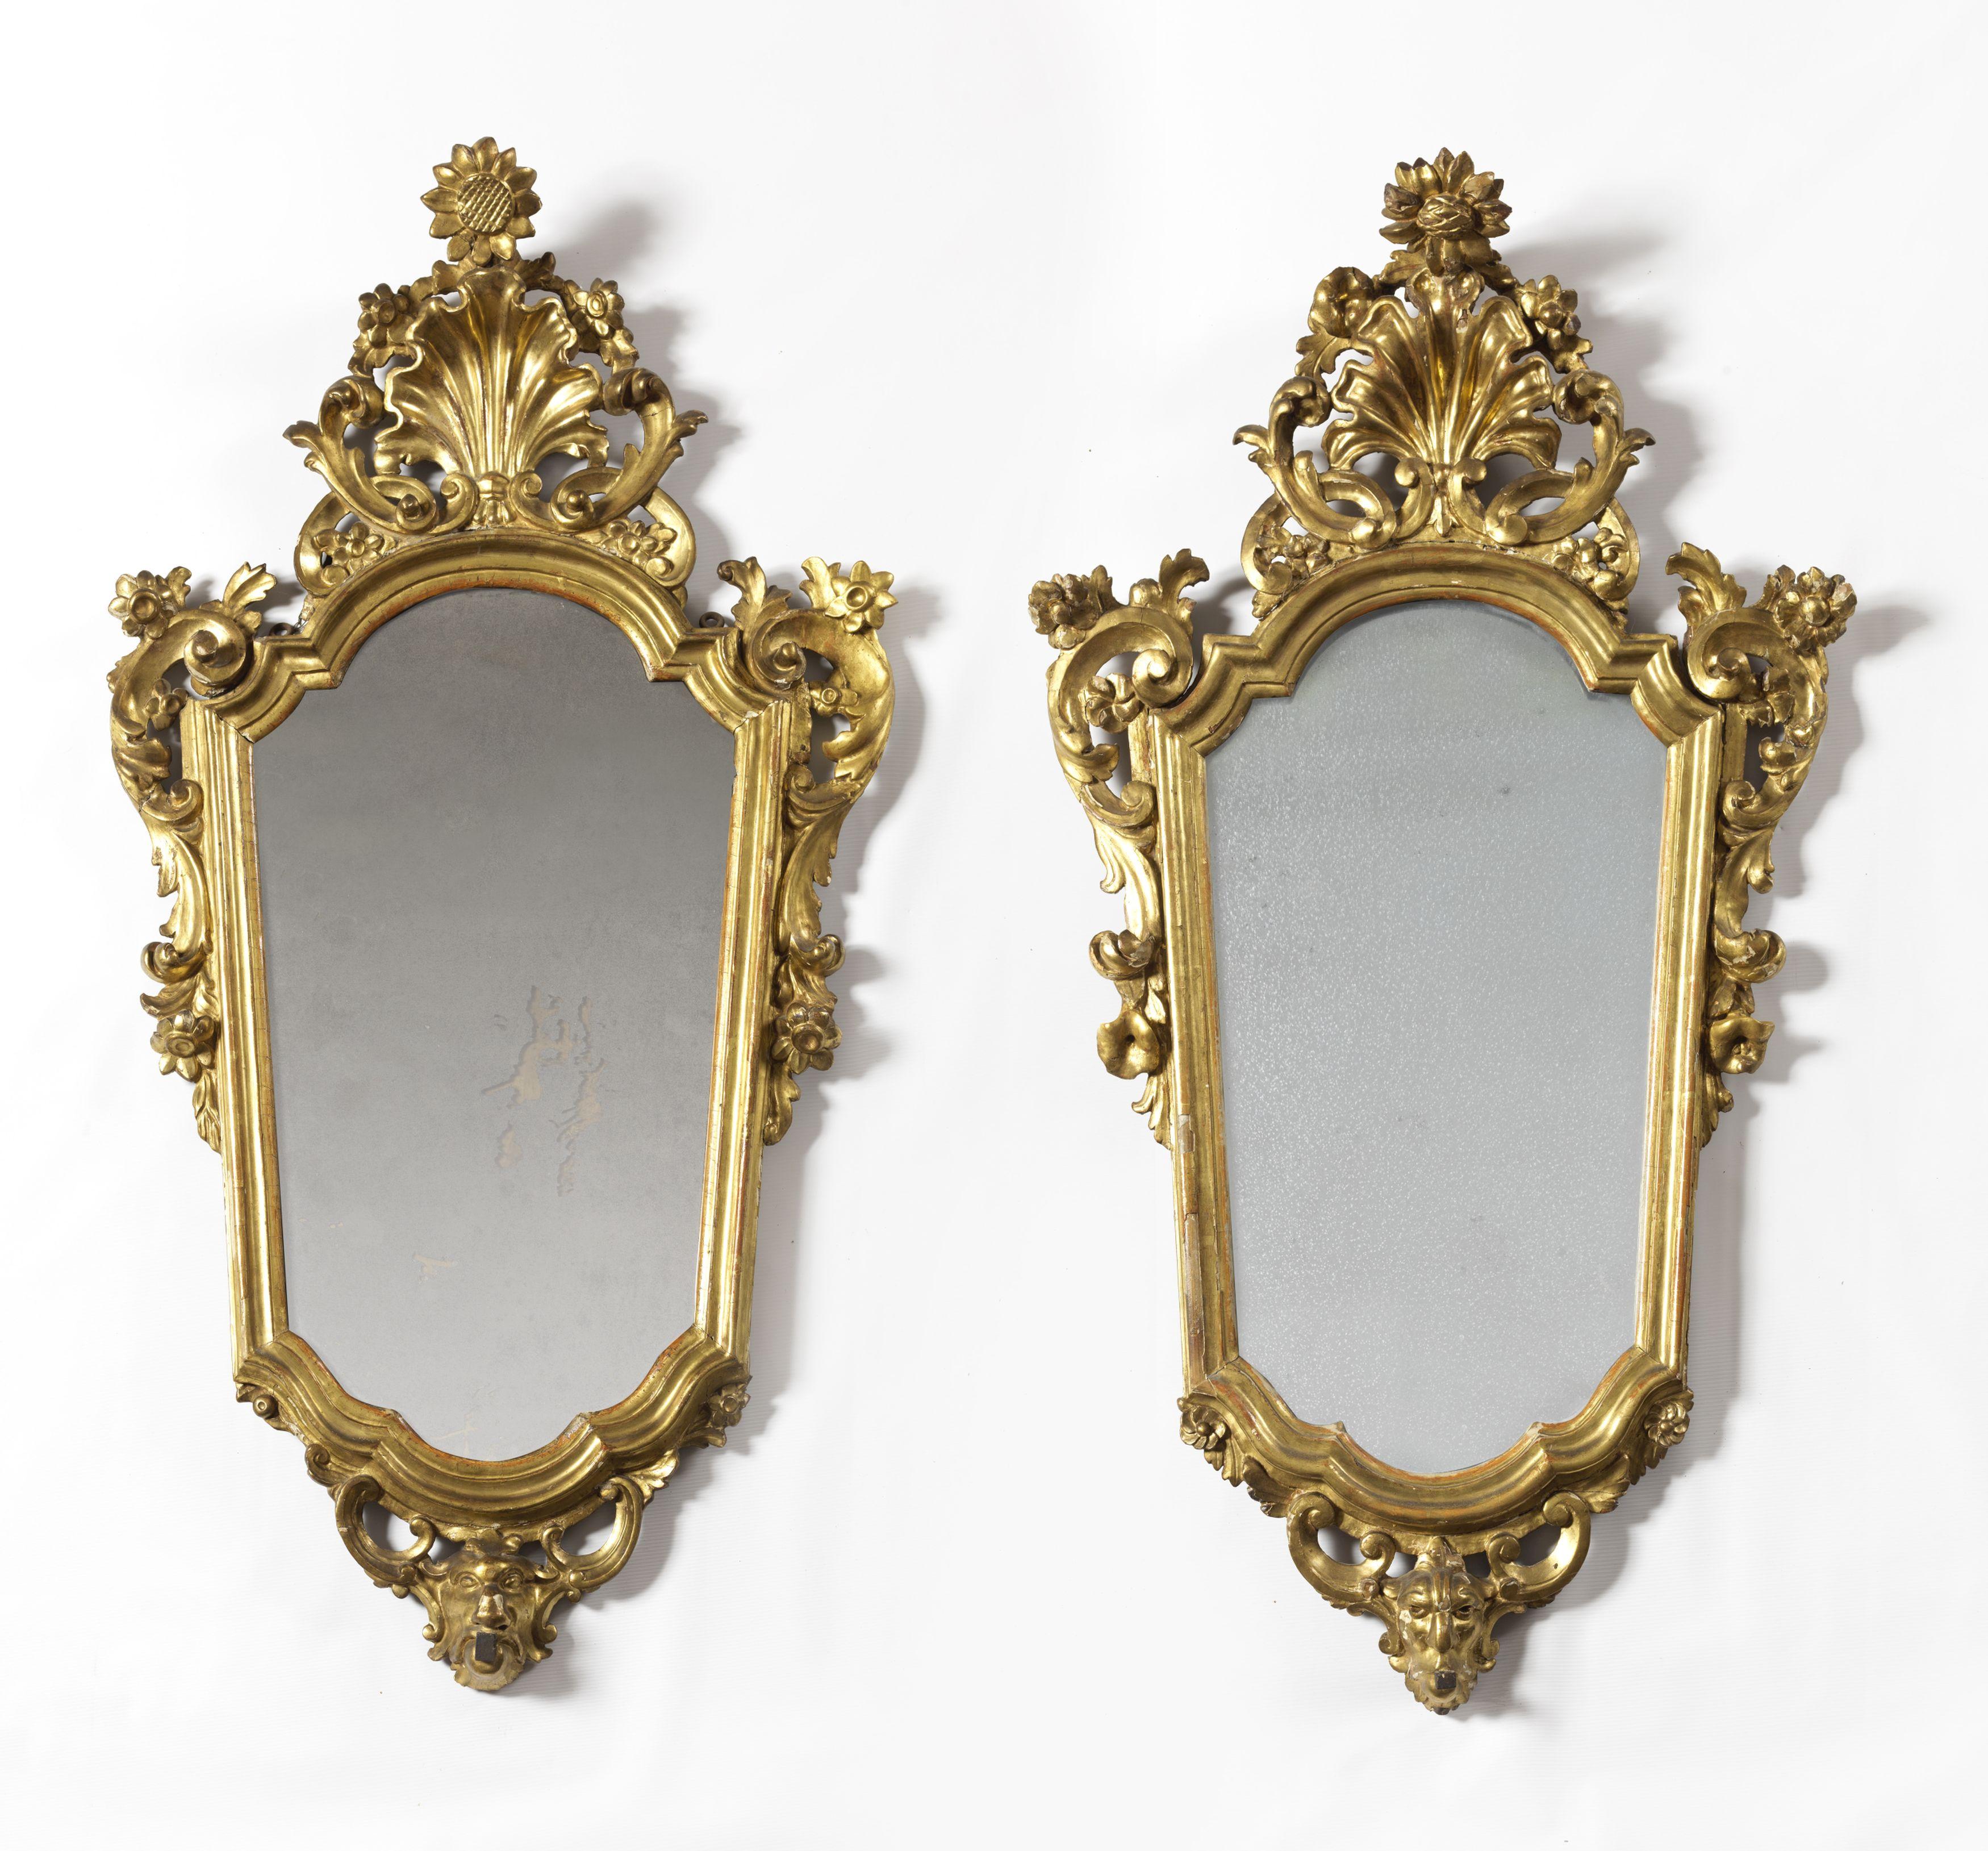 Refined pair of Lombard Louis XV mirrors measuring 95 x 55 cm from the first half of the 18th century, in carved, sculpted and gilded walnut with original 18th century mercury glass, with final coping and paws carved with scrolls and floral ribbons